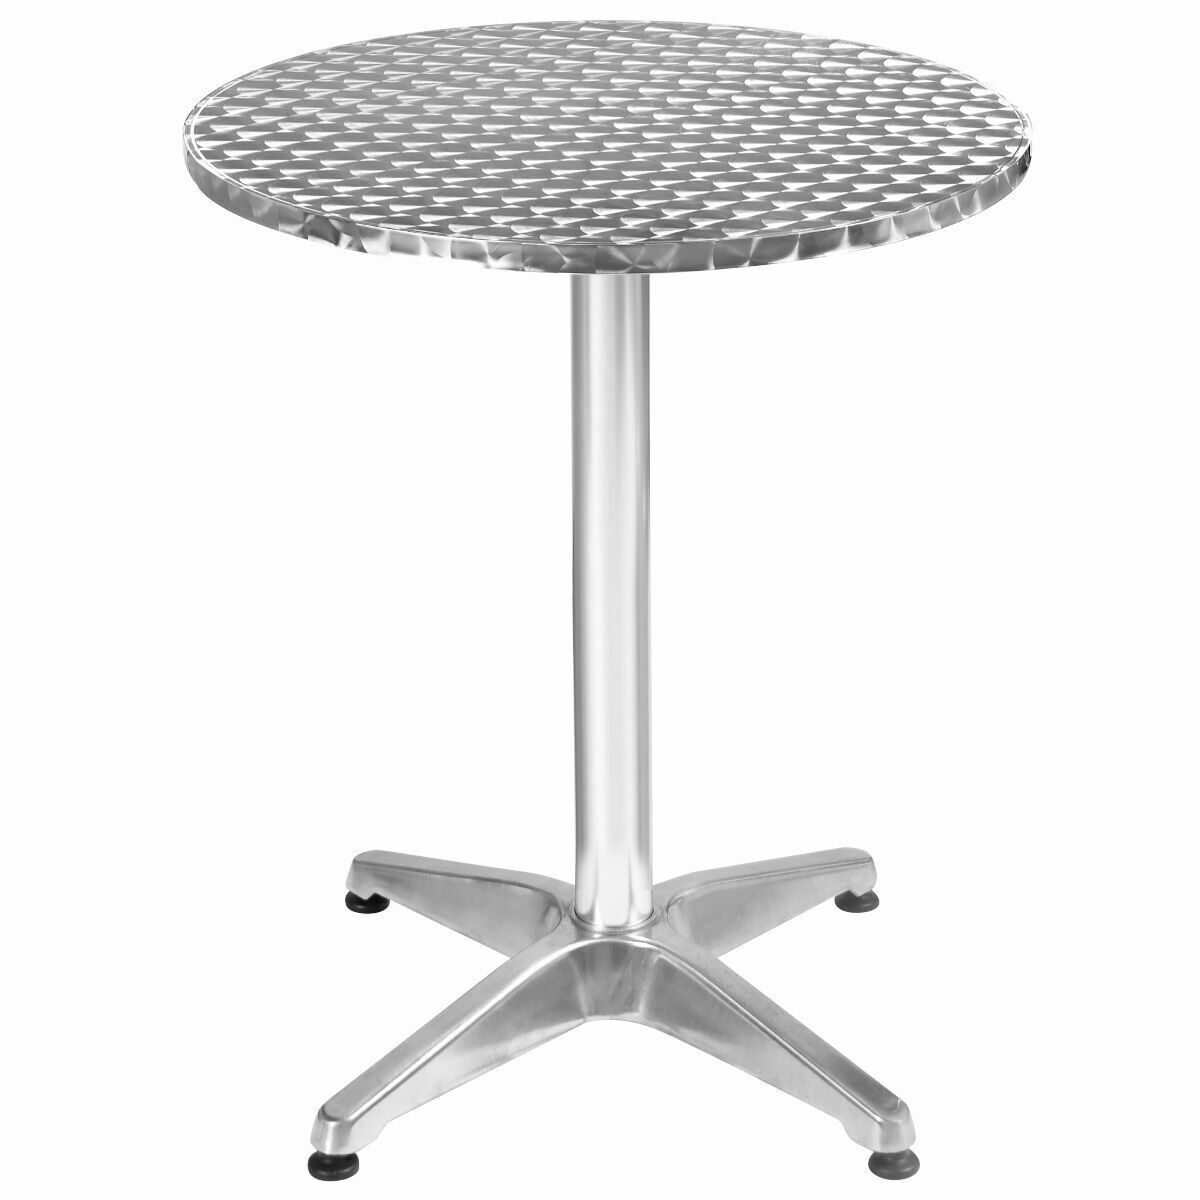 thebestshop99 Aluminum Stainless Steel Round Table Patio Bar Pub Restaurant Home Adjustable Round Table 23 1/2